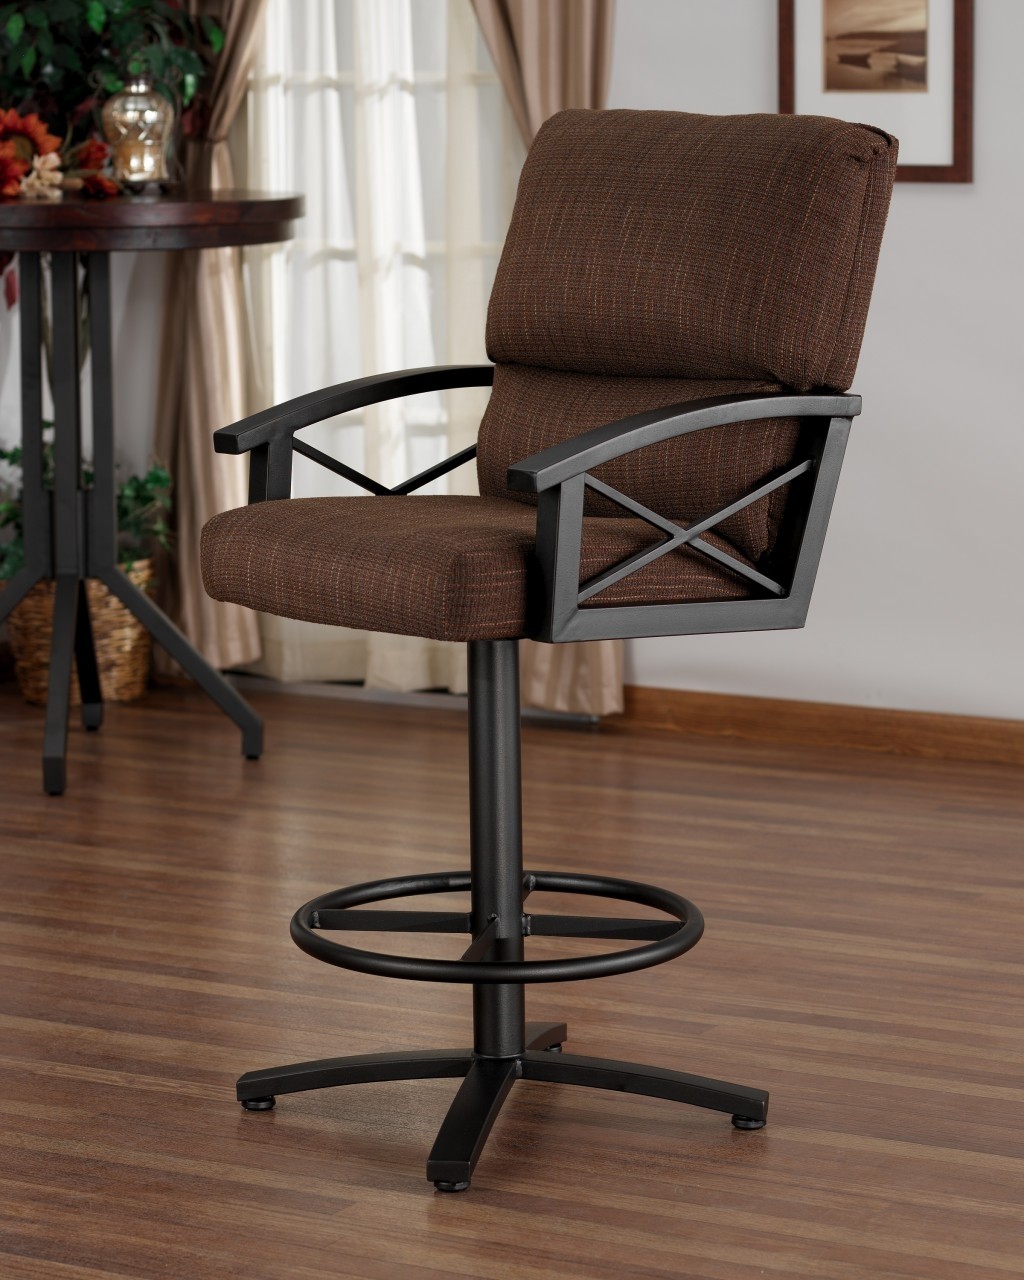 Swivel bar stools with arms 1